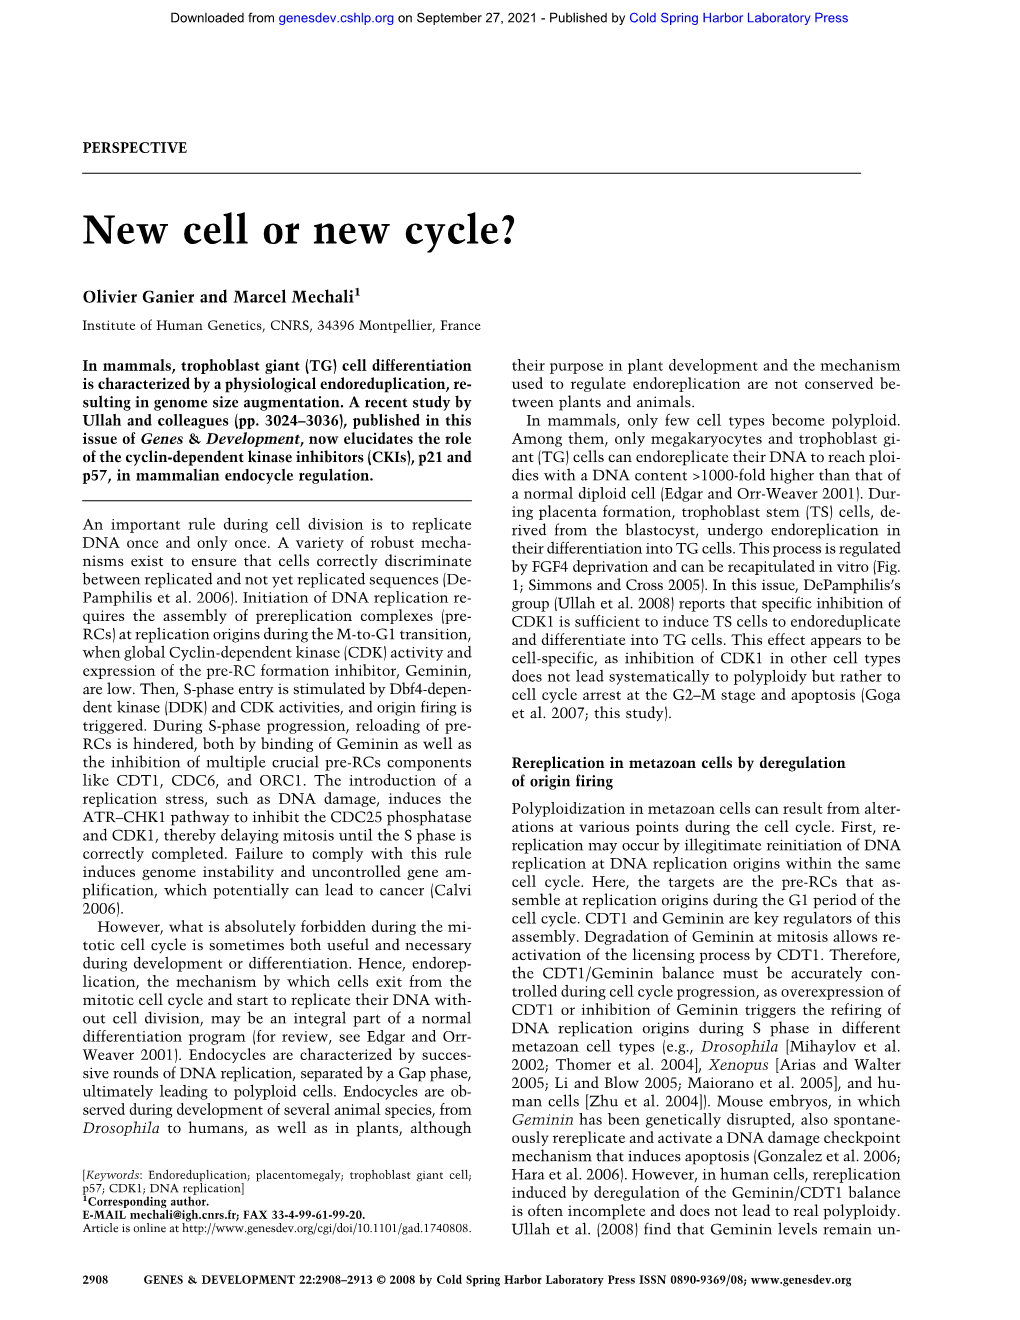 New Cell Or New Cycle?